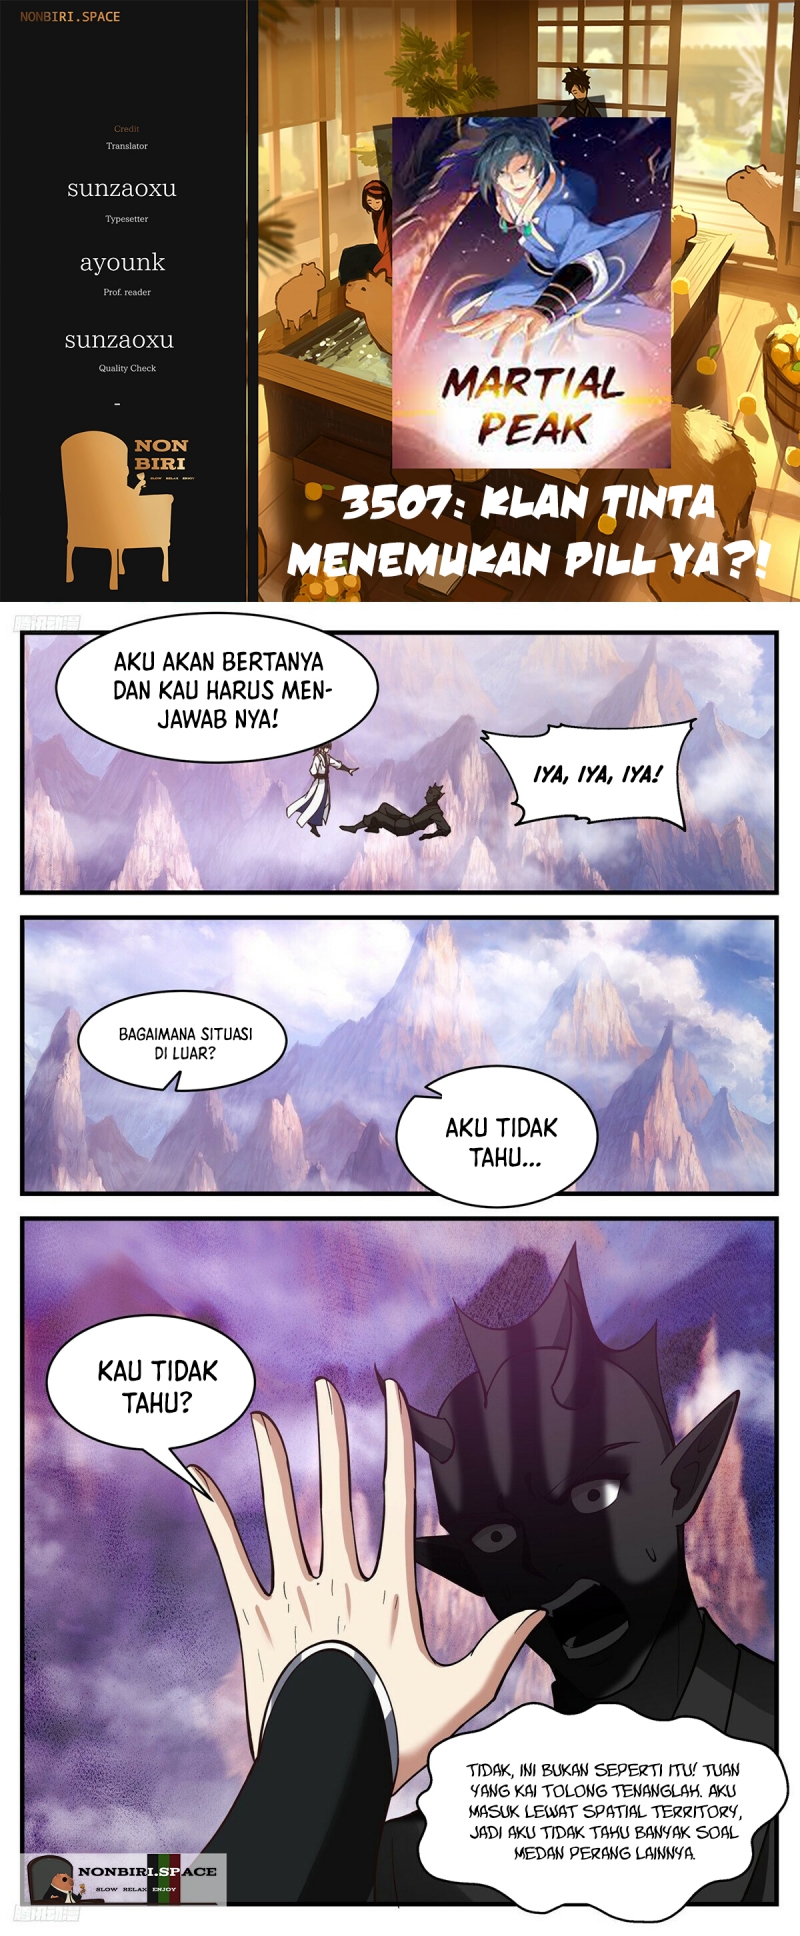 Martial Peak: Chapter 3507 - Page 1